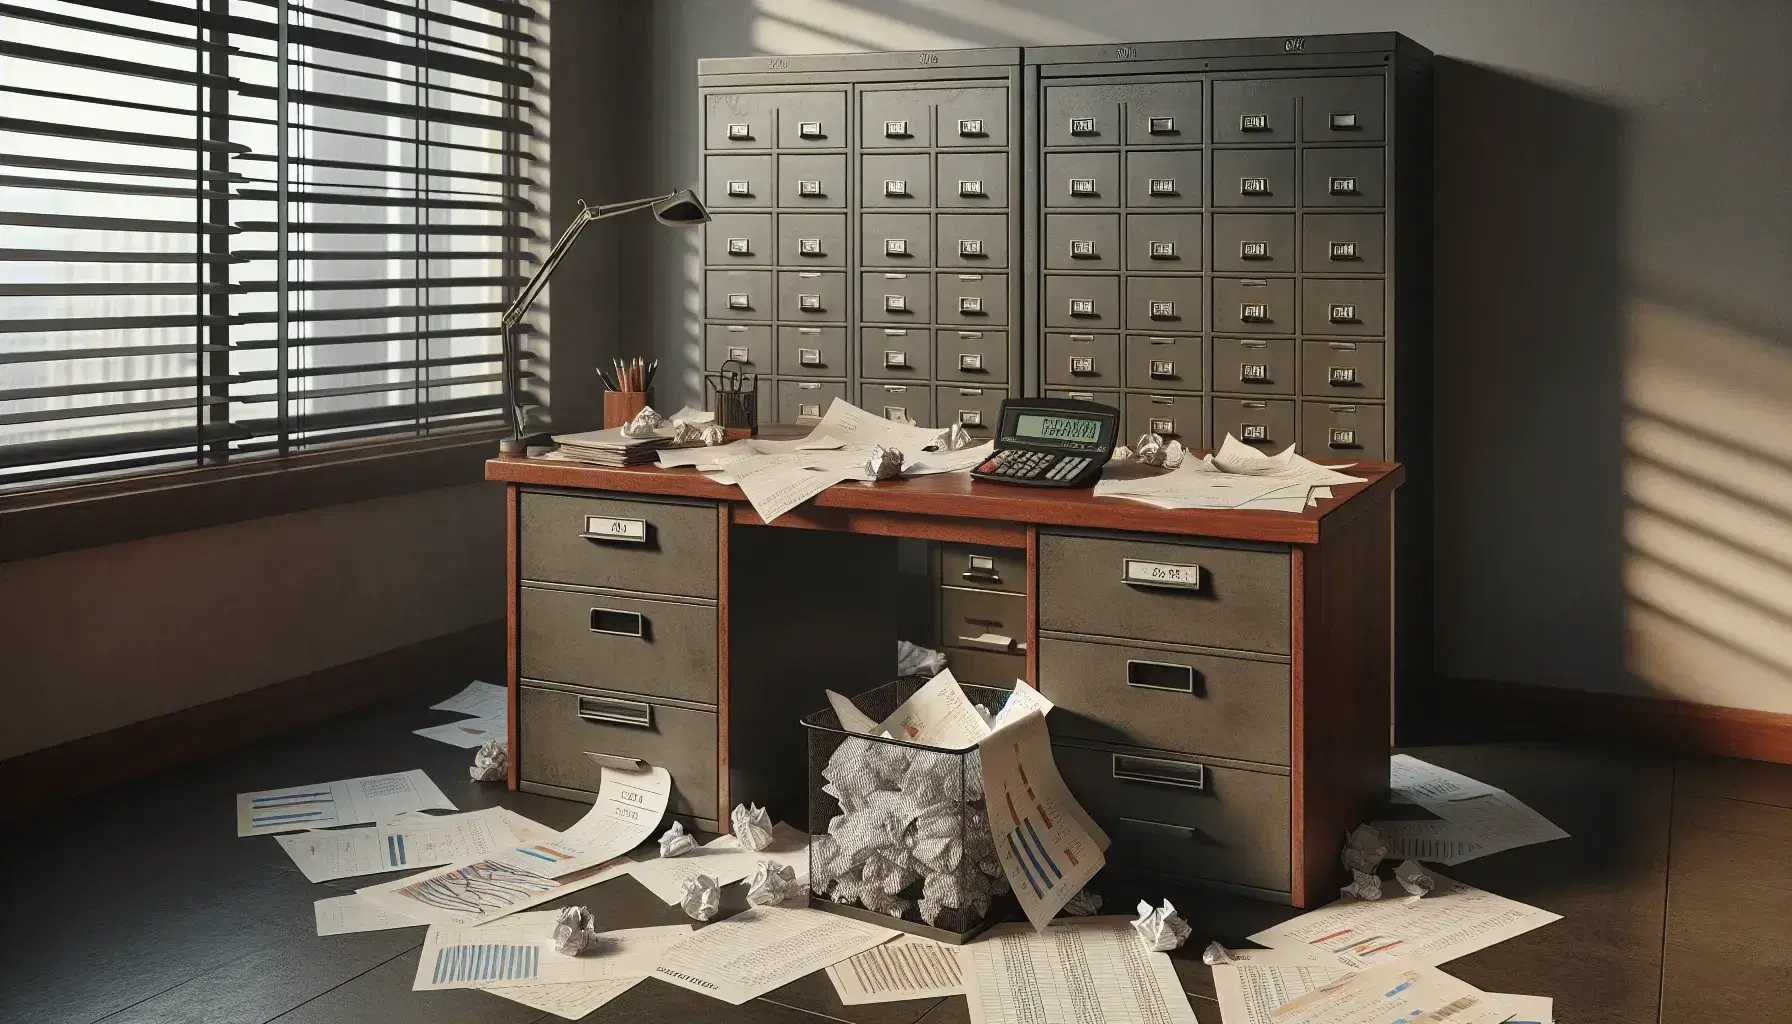 Cluttered office with a mahogany desk covered in disorganized financial papers, an overflowing waste basket, and an open steel filing cabinet.